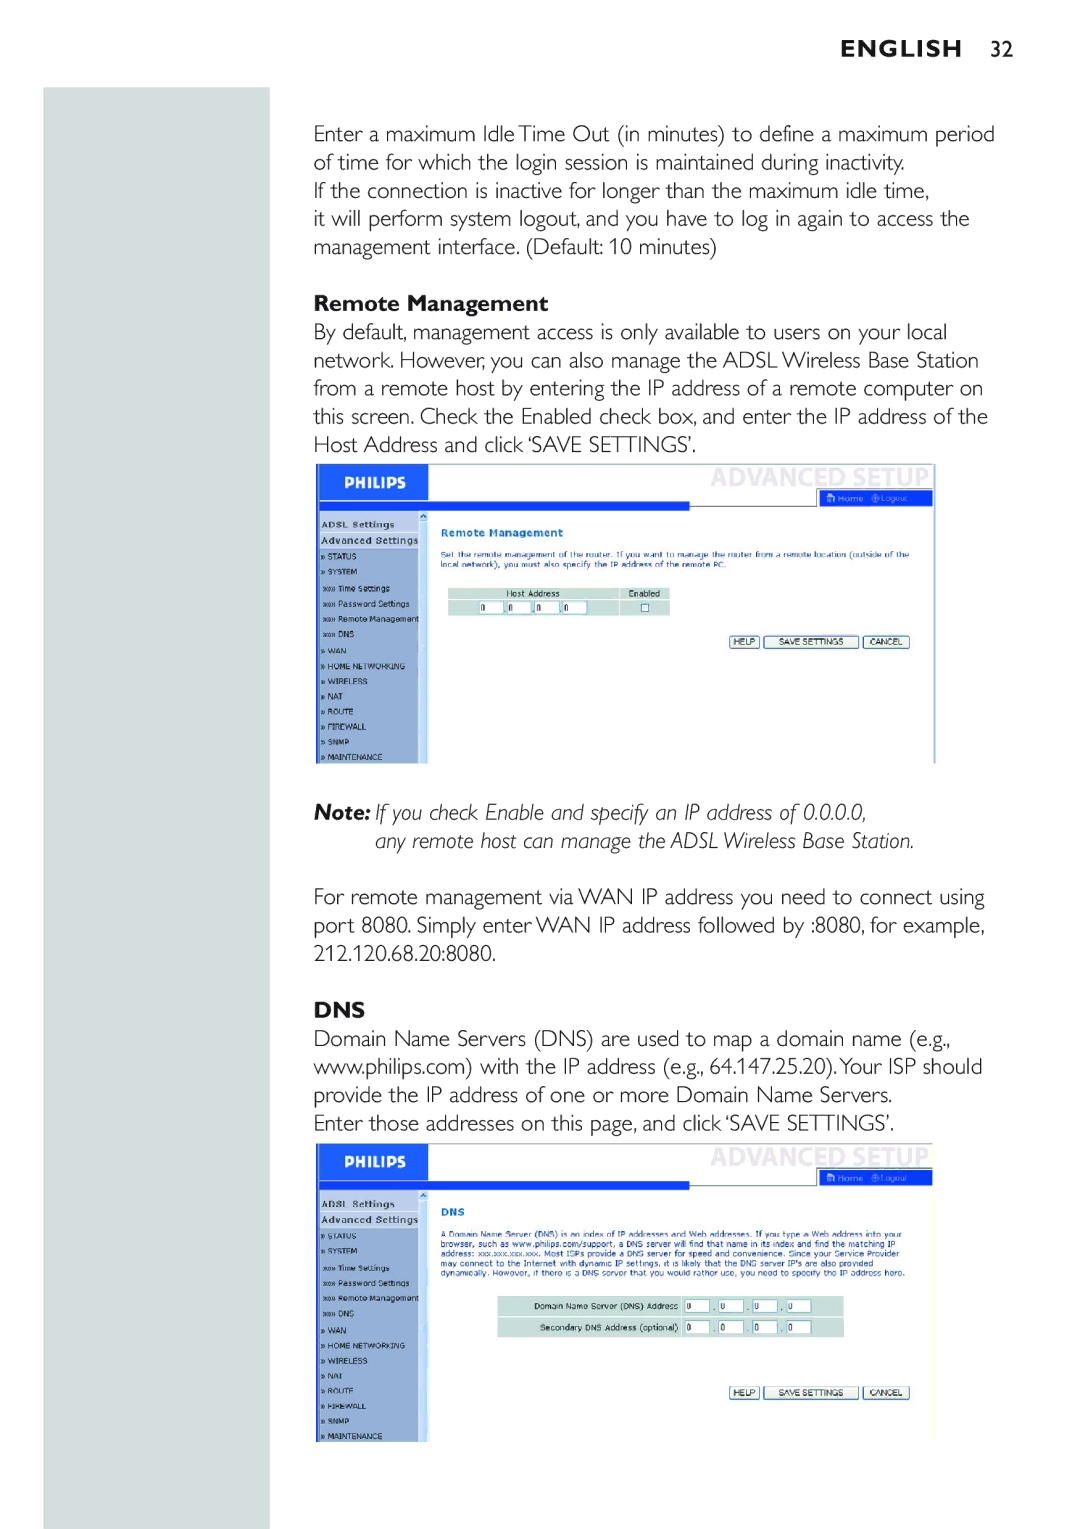 Philips CPWBS154 manual Remote Management, Dns 